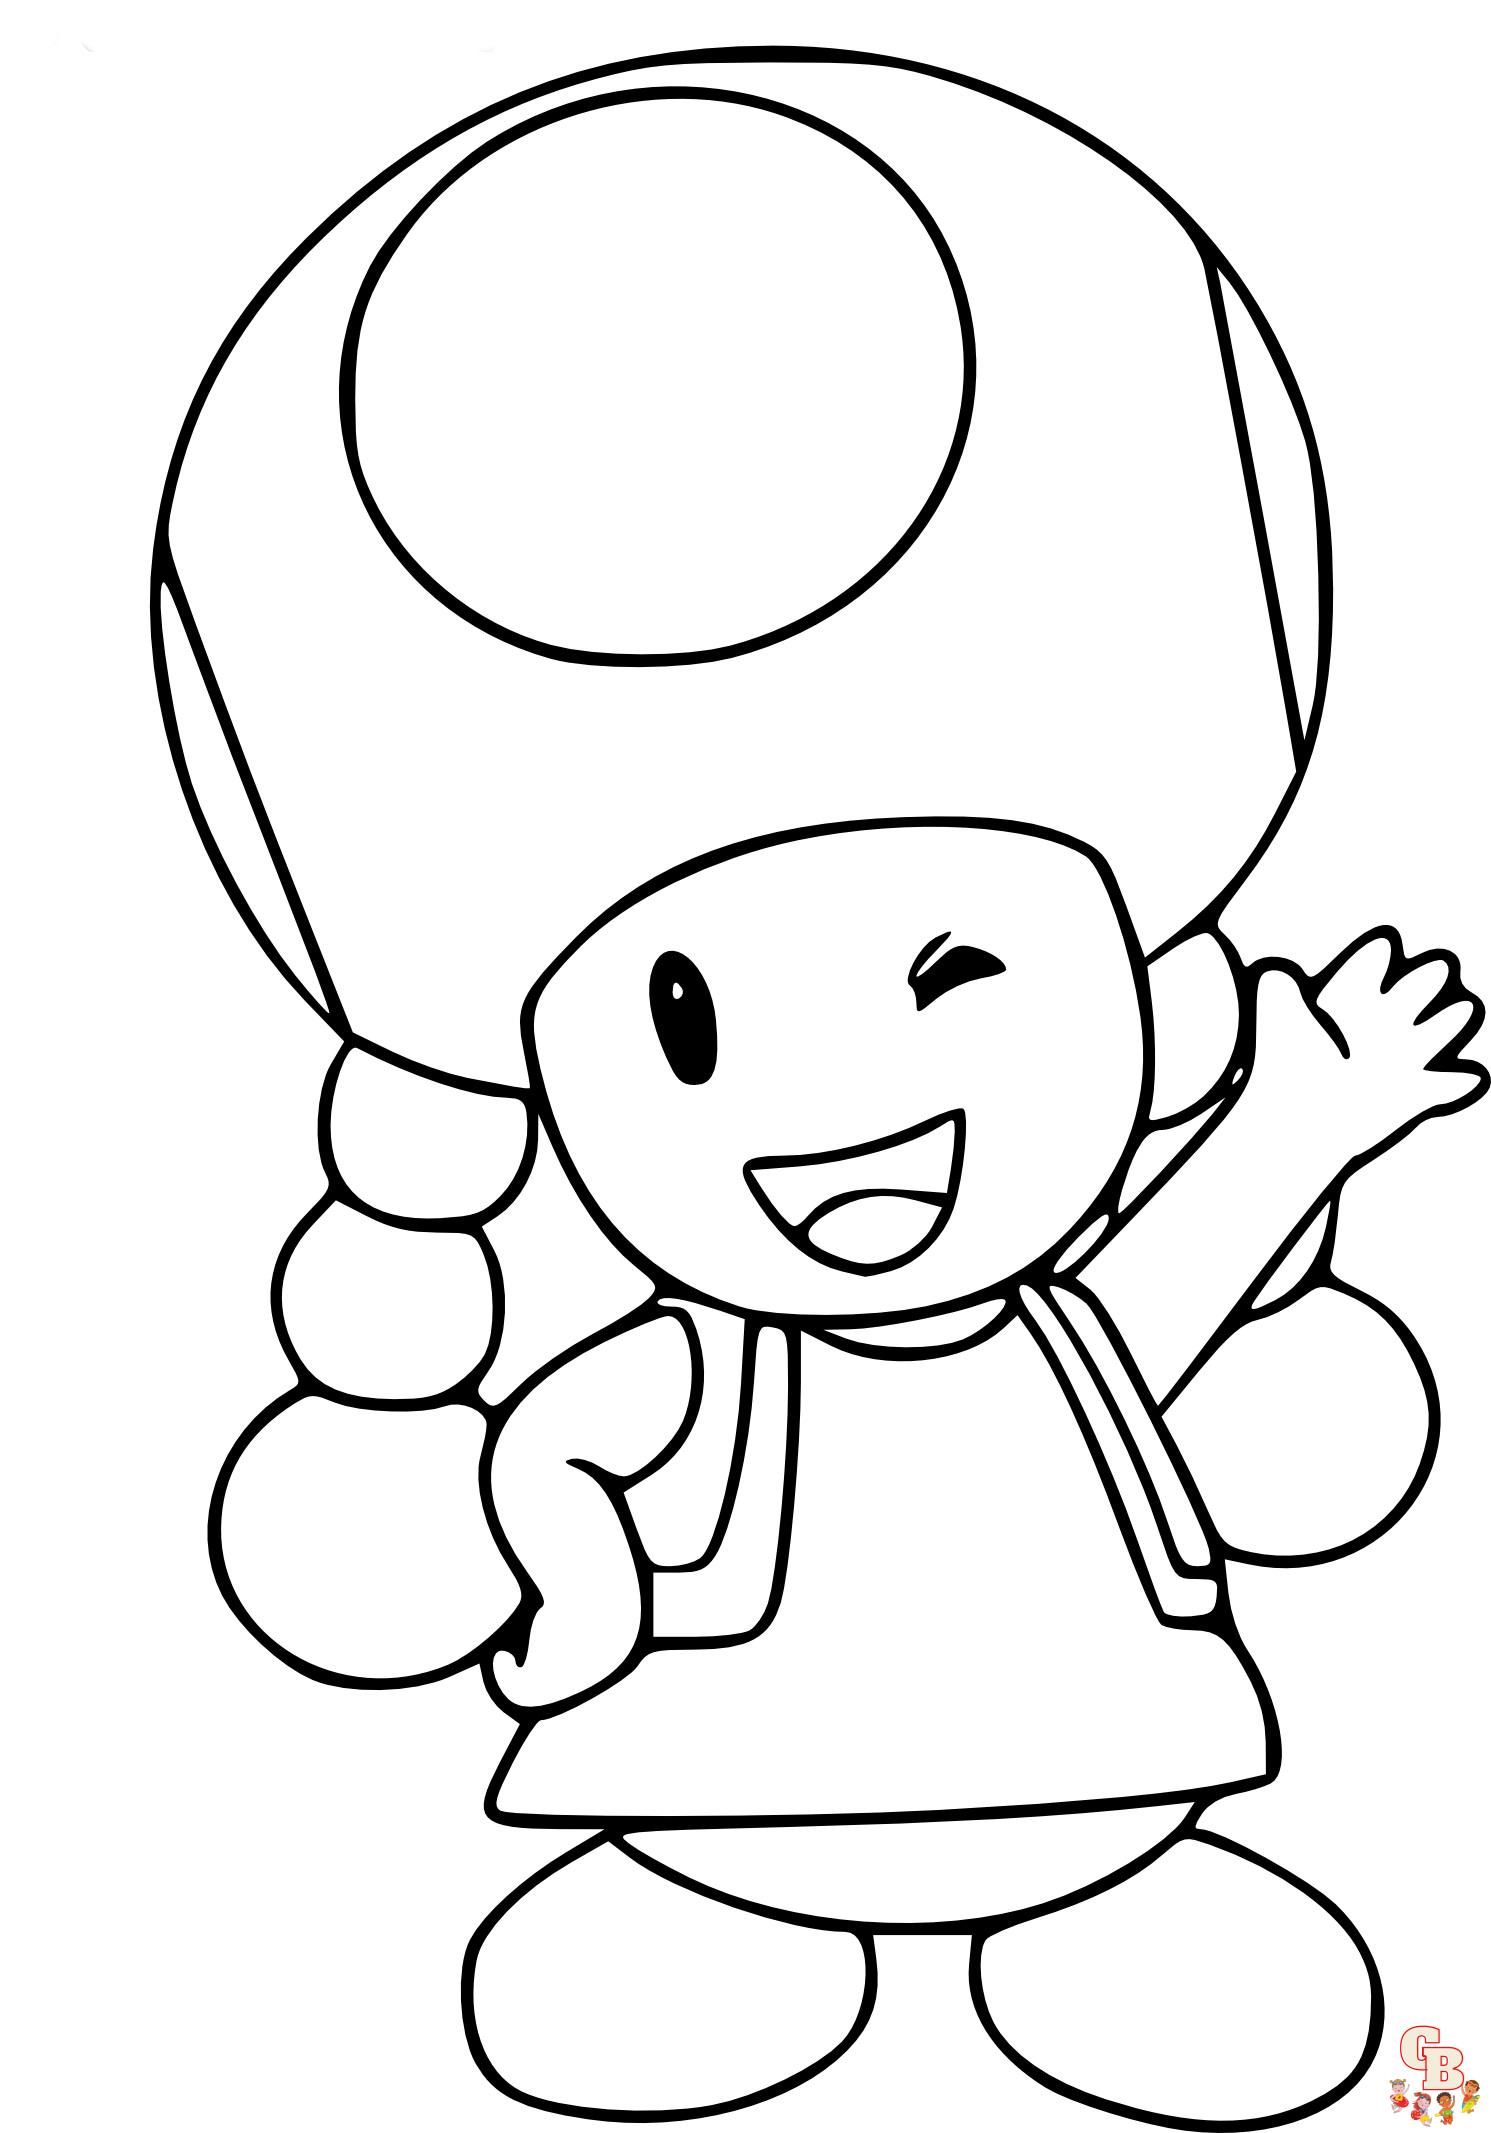 toadette Coloring Sheets